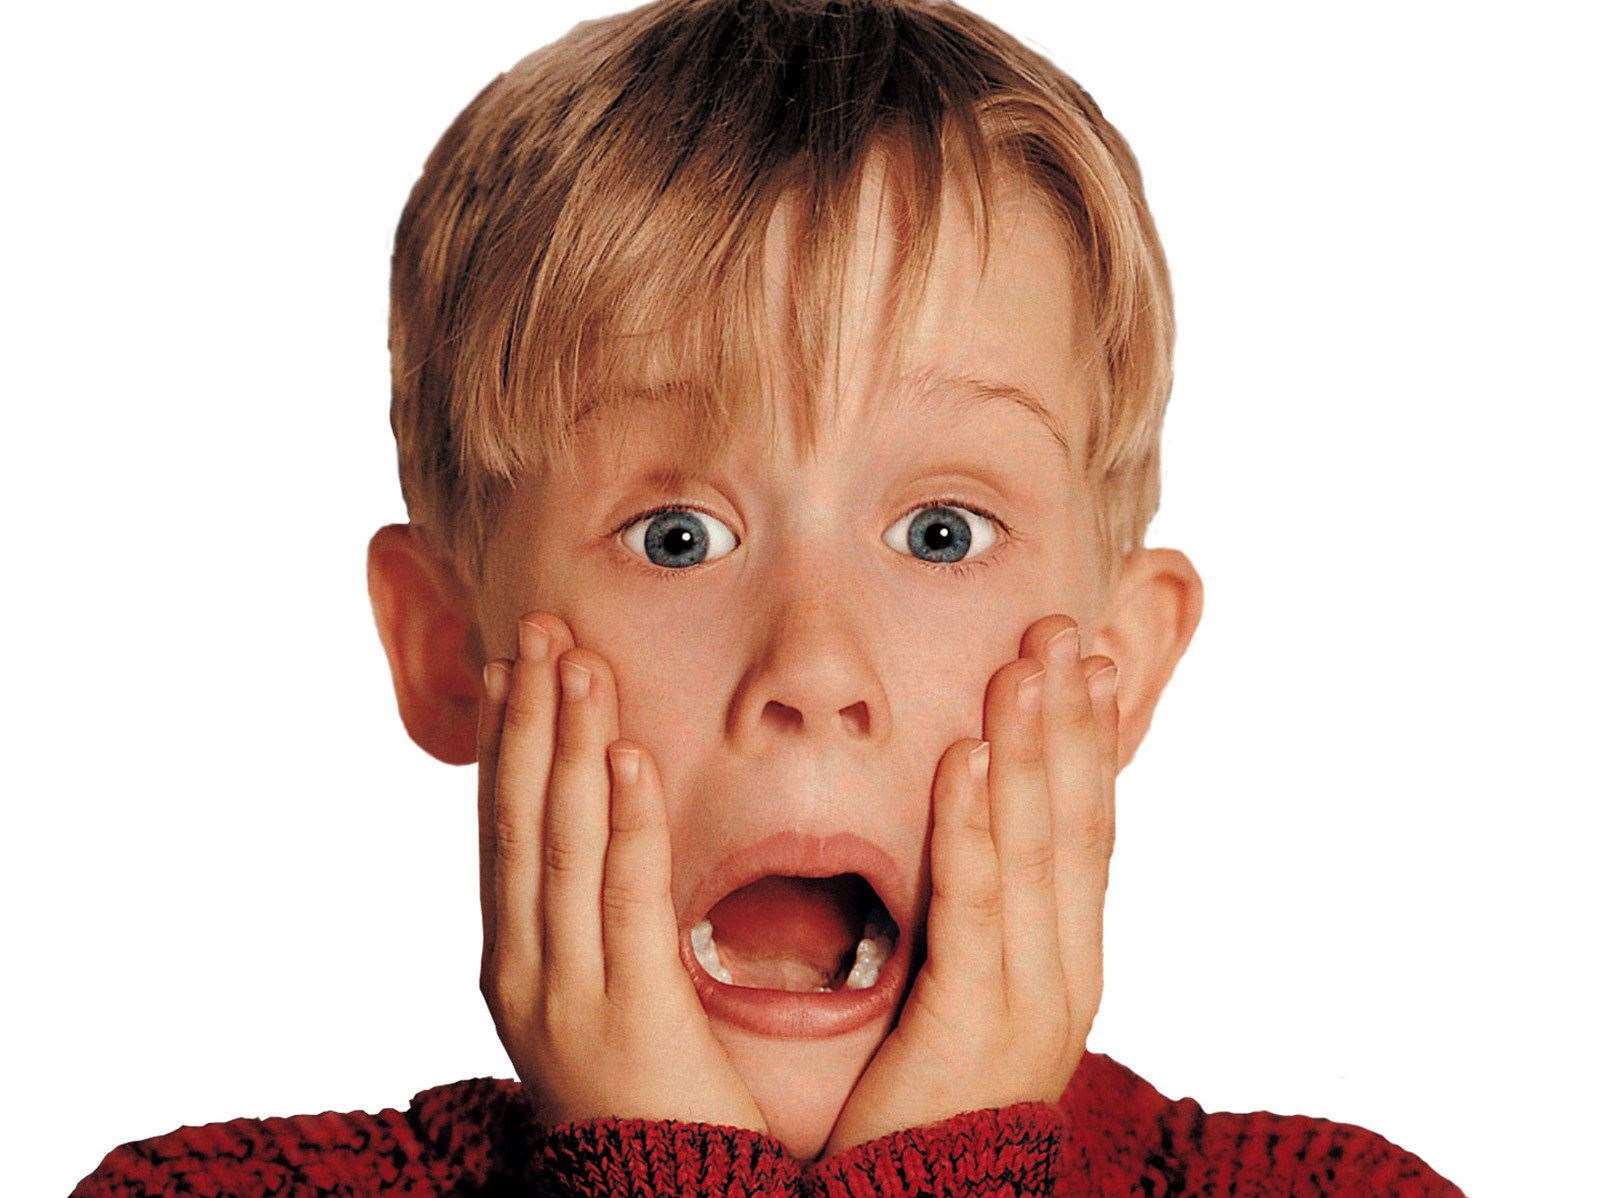 Viewers watched the 1990 hit Home Alone